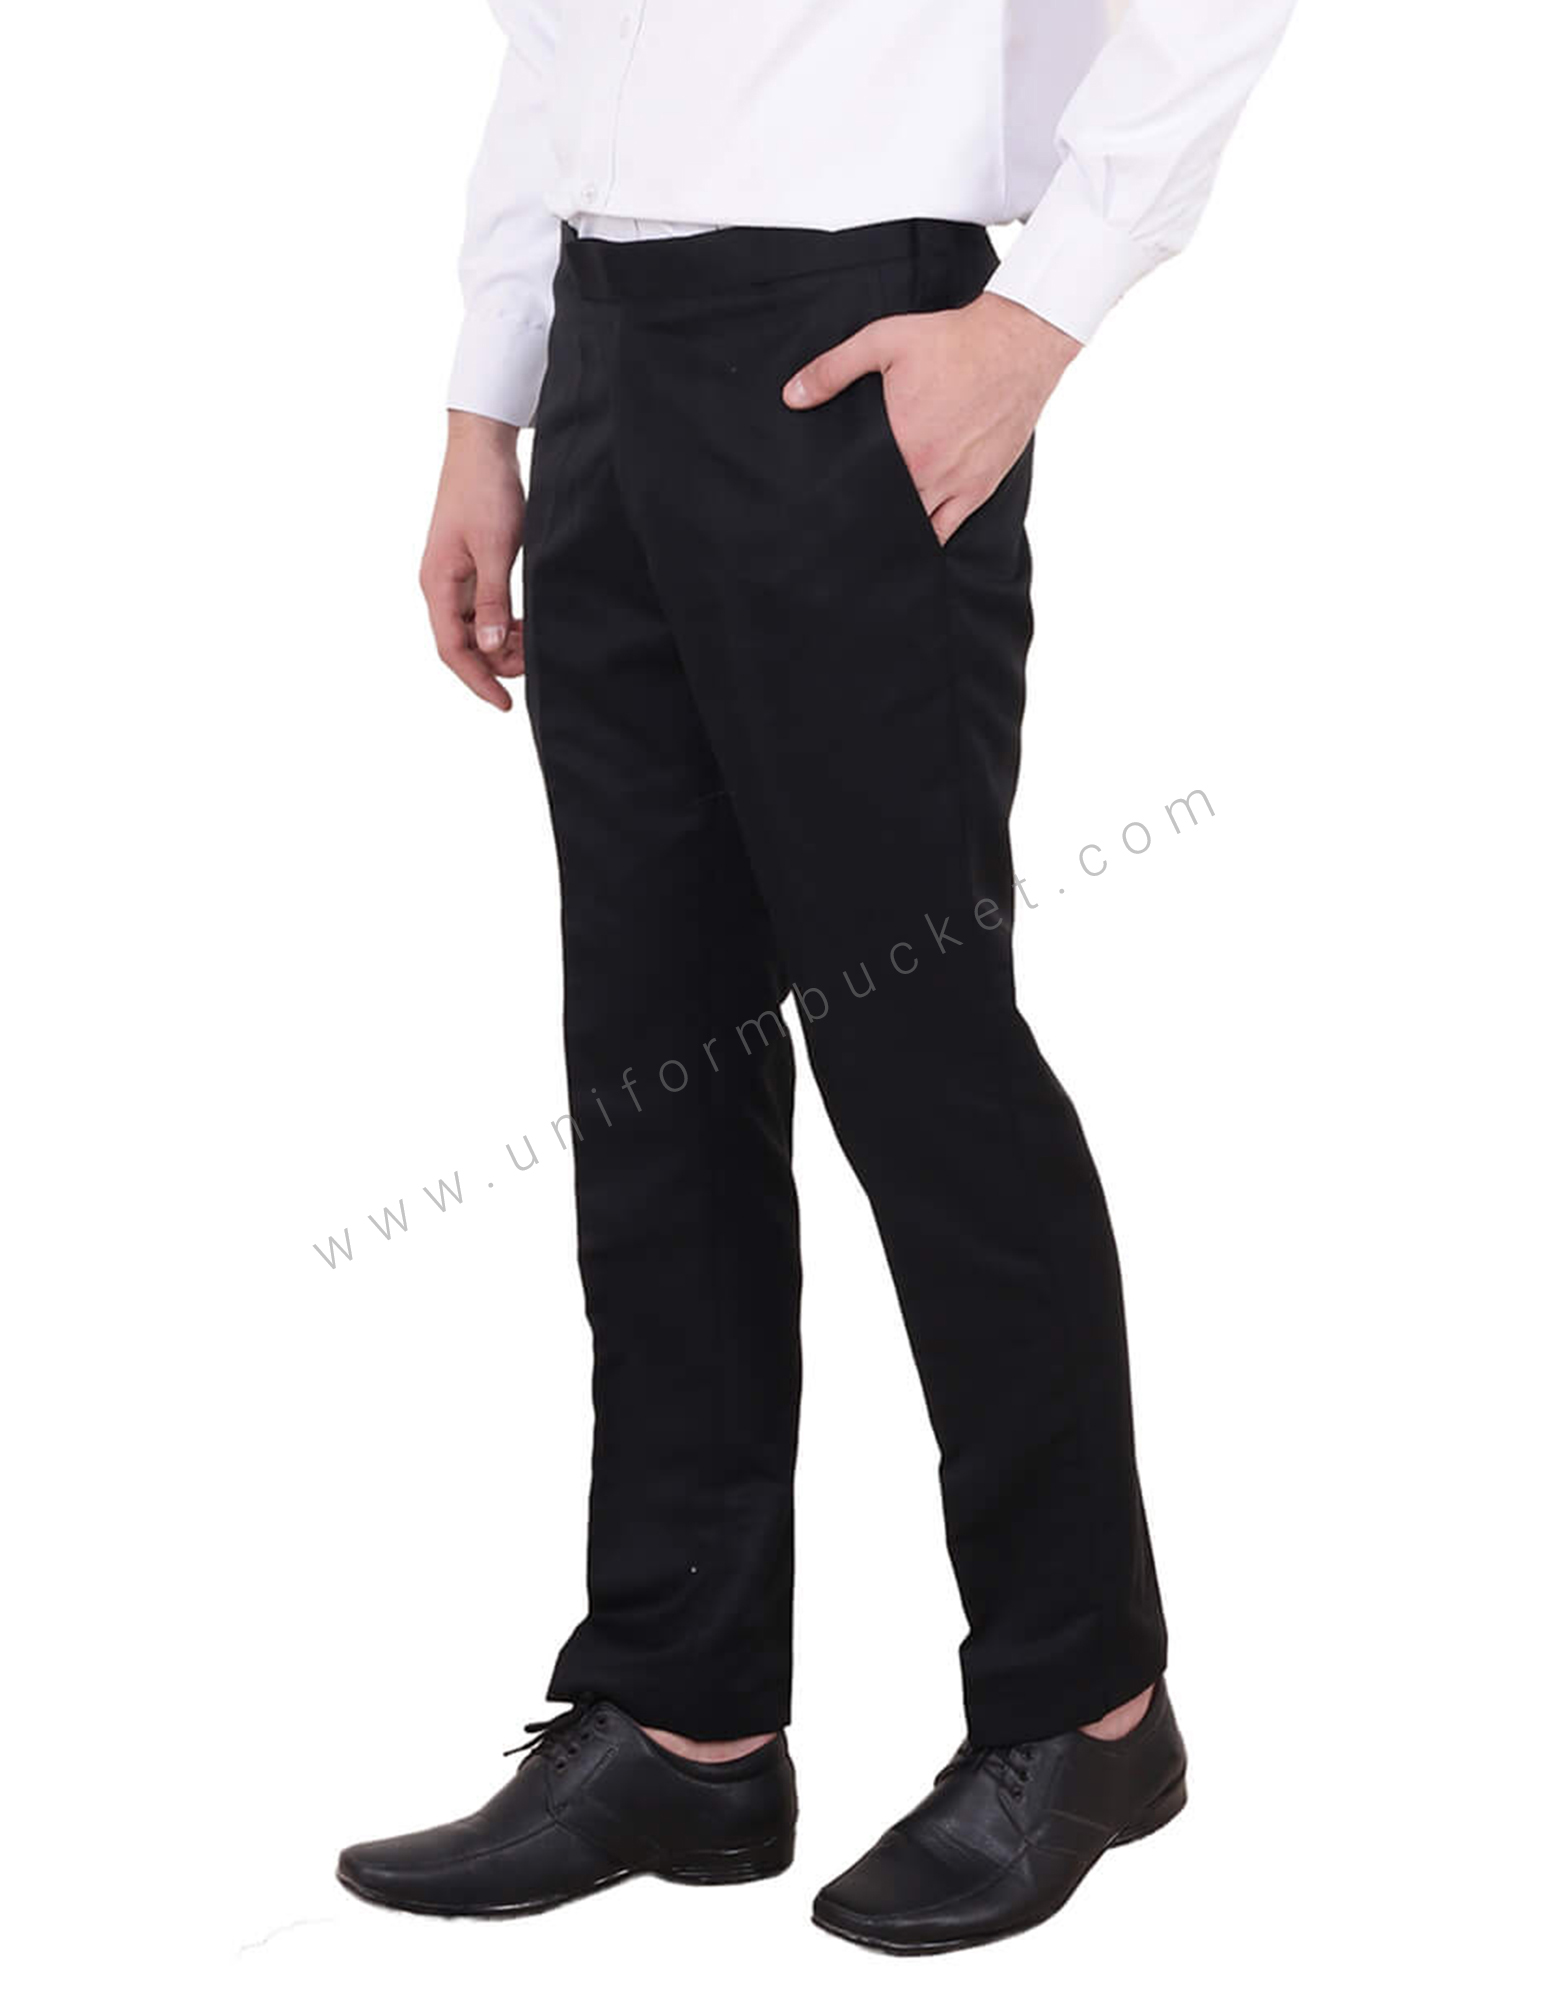 Ankle Fit Black 4 Way Stretchable Smart formal pants – Stagbeetle